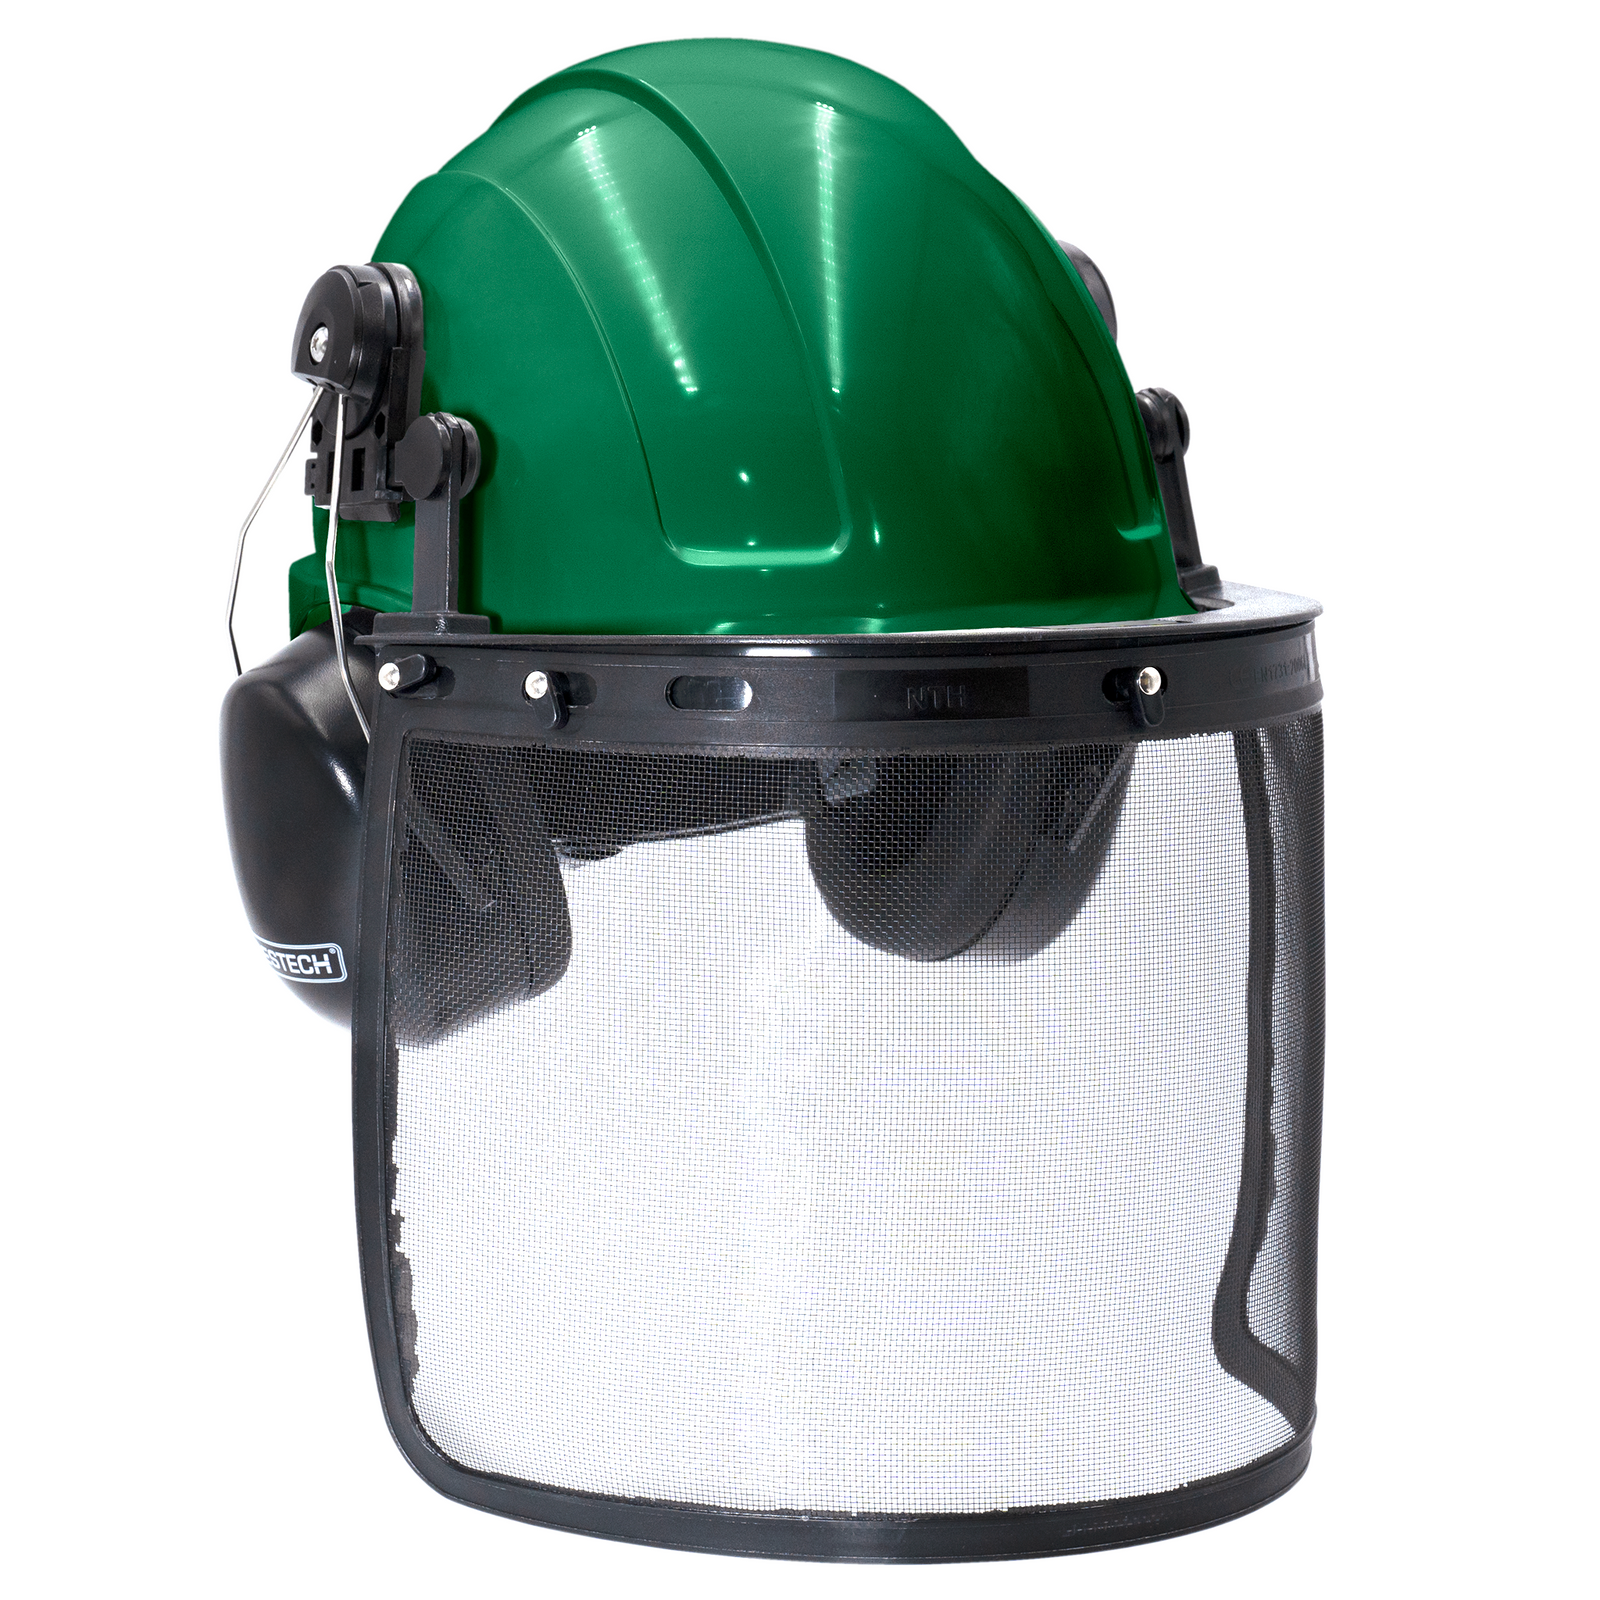 Green safety cap style helmet with iron mesh face shield and earmuffs for hearing protection